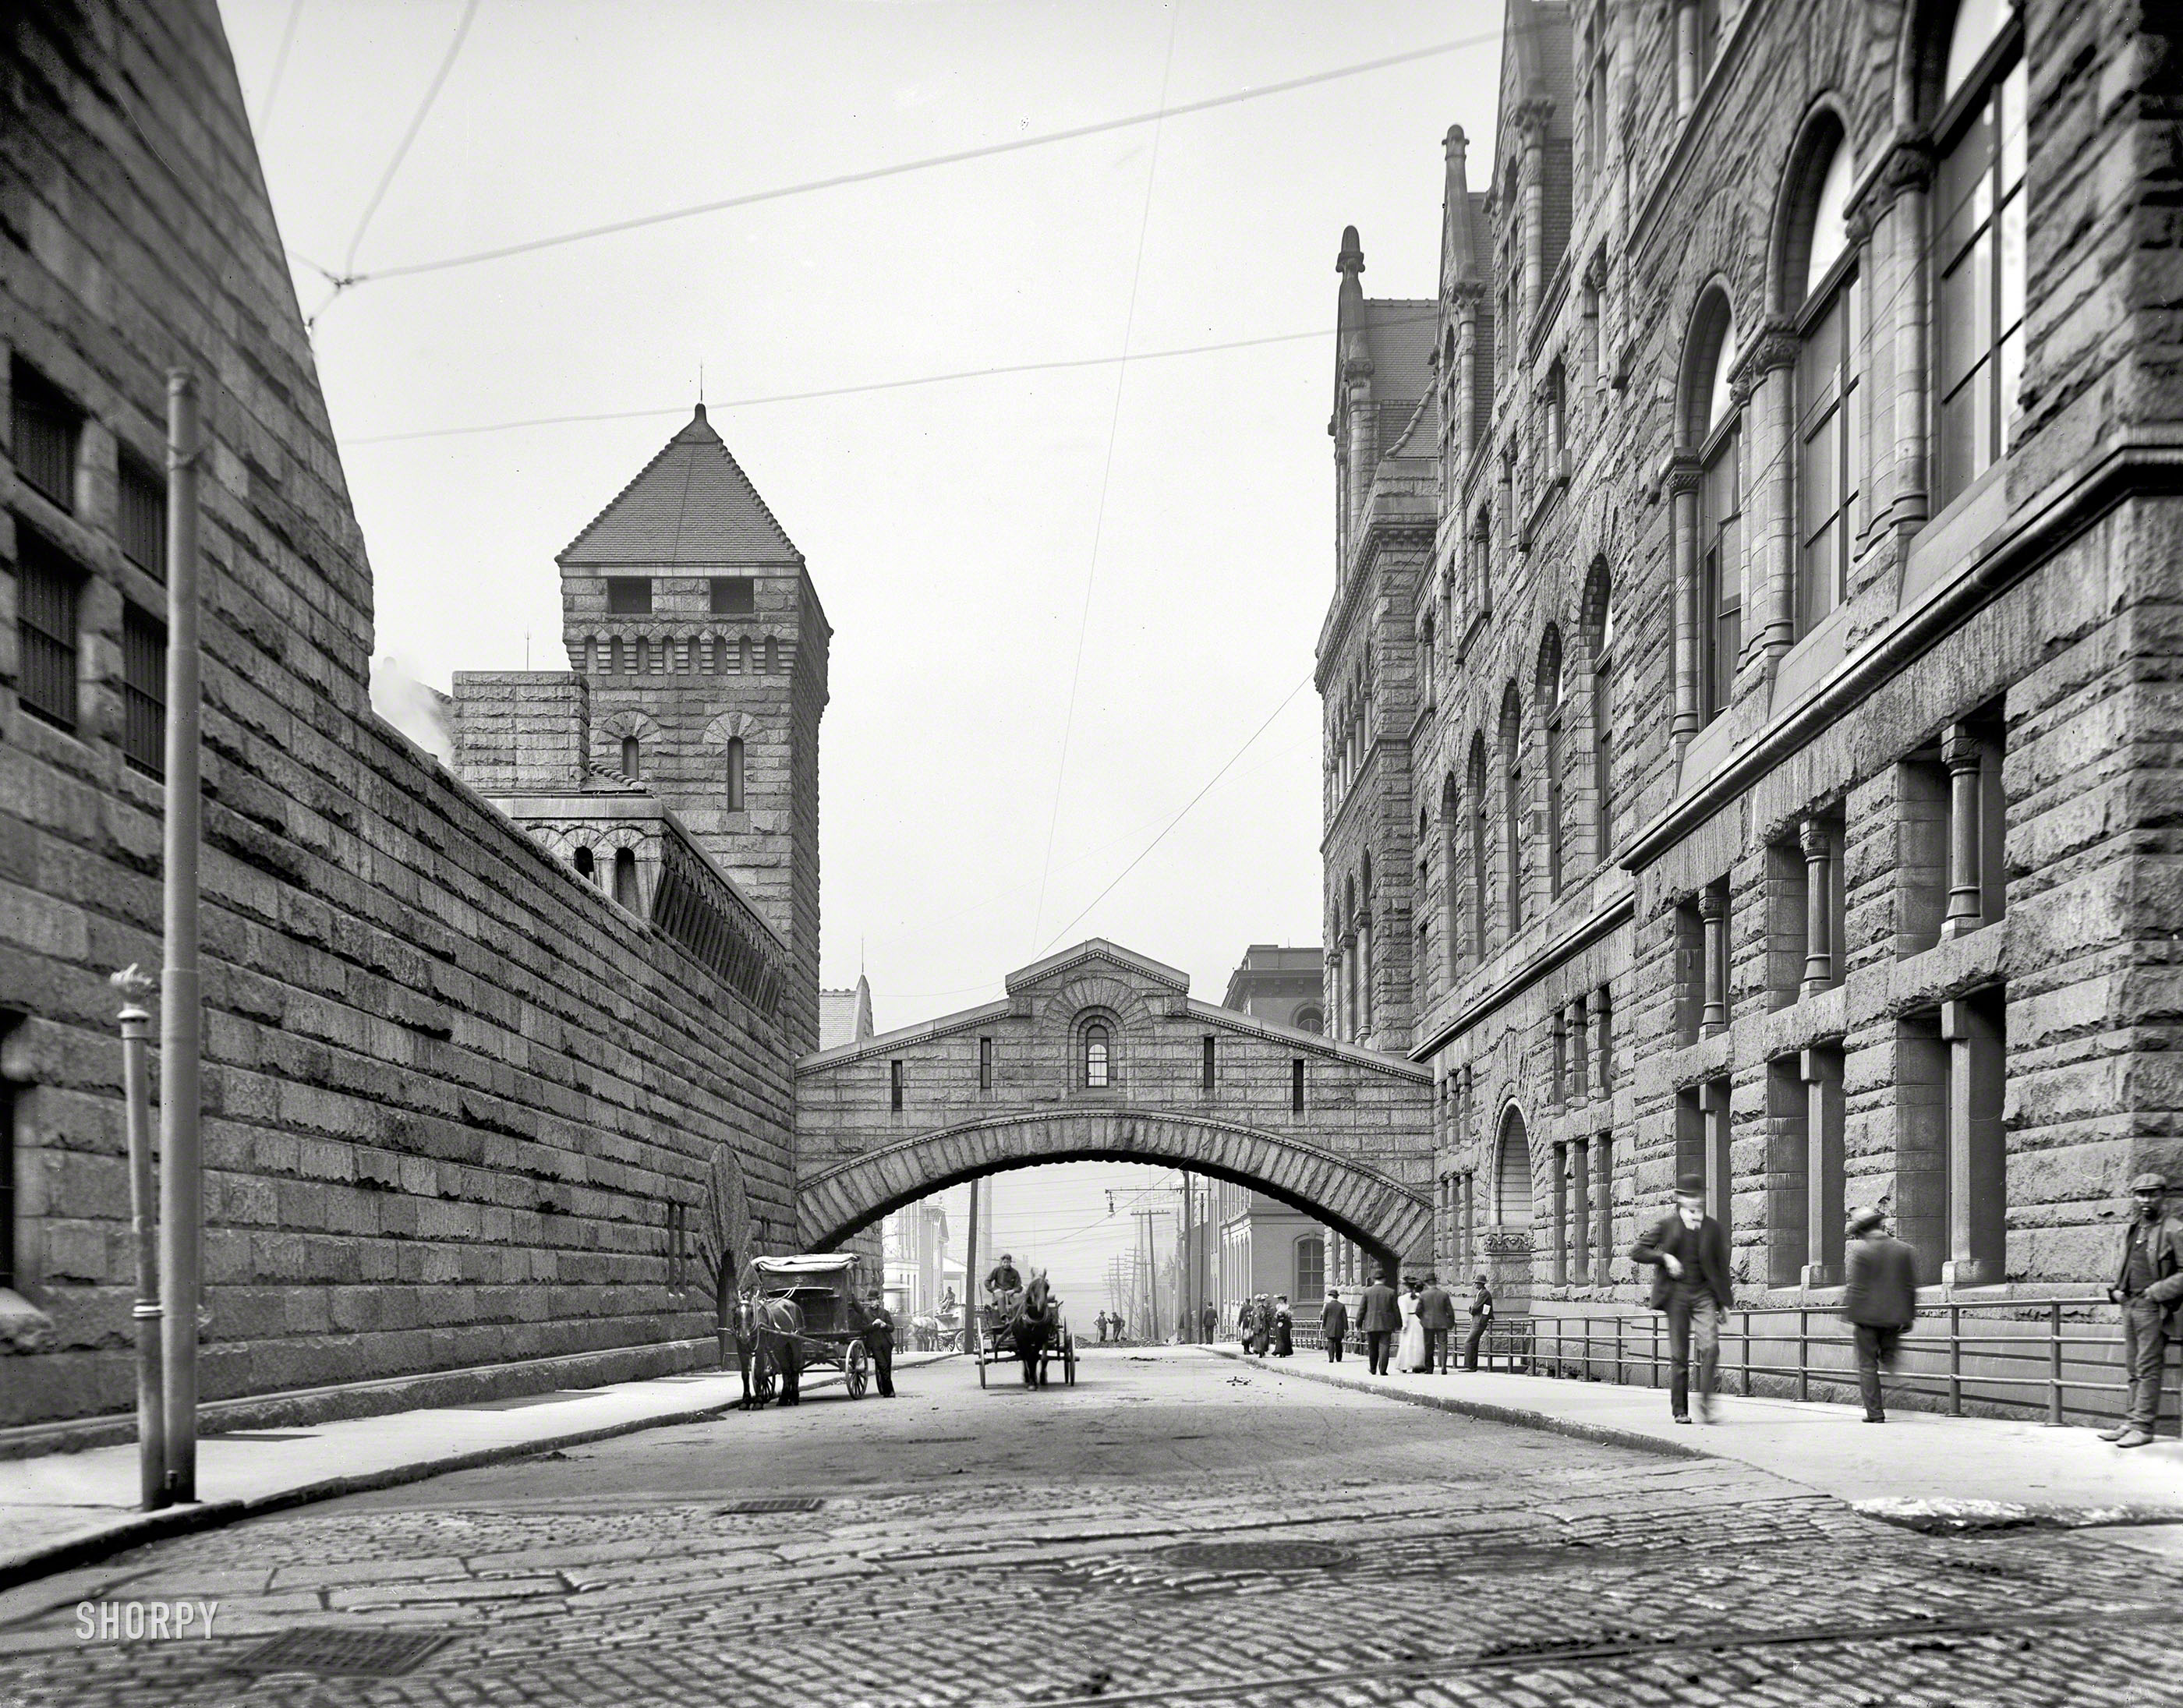 Circa 1903. "Bridge of Sighs, Pittsburgh." Named after the famous span in Venice, it was used to transport prisoners between the Allegheny County Courthouse and the jail. 8x10 inch glass negative, Detroit Publishing Company. View full size.